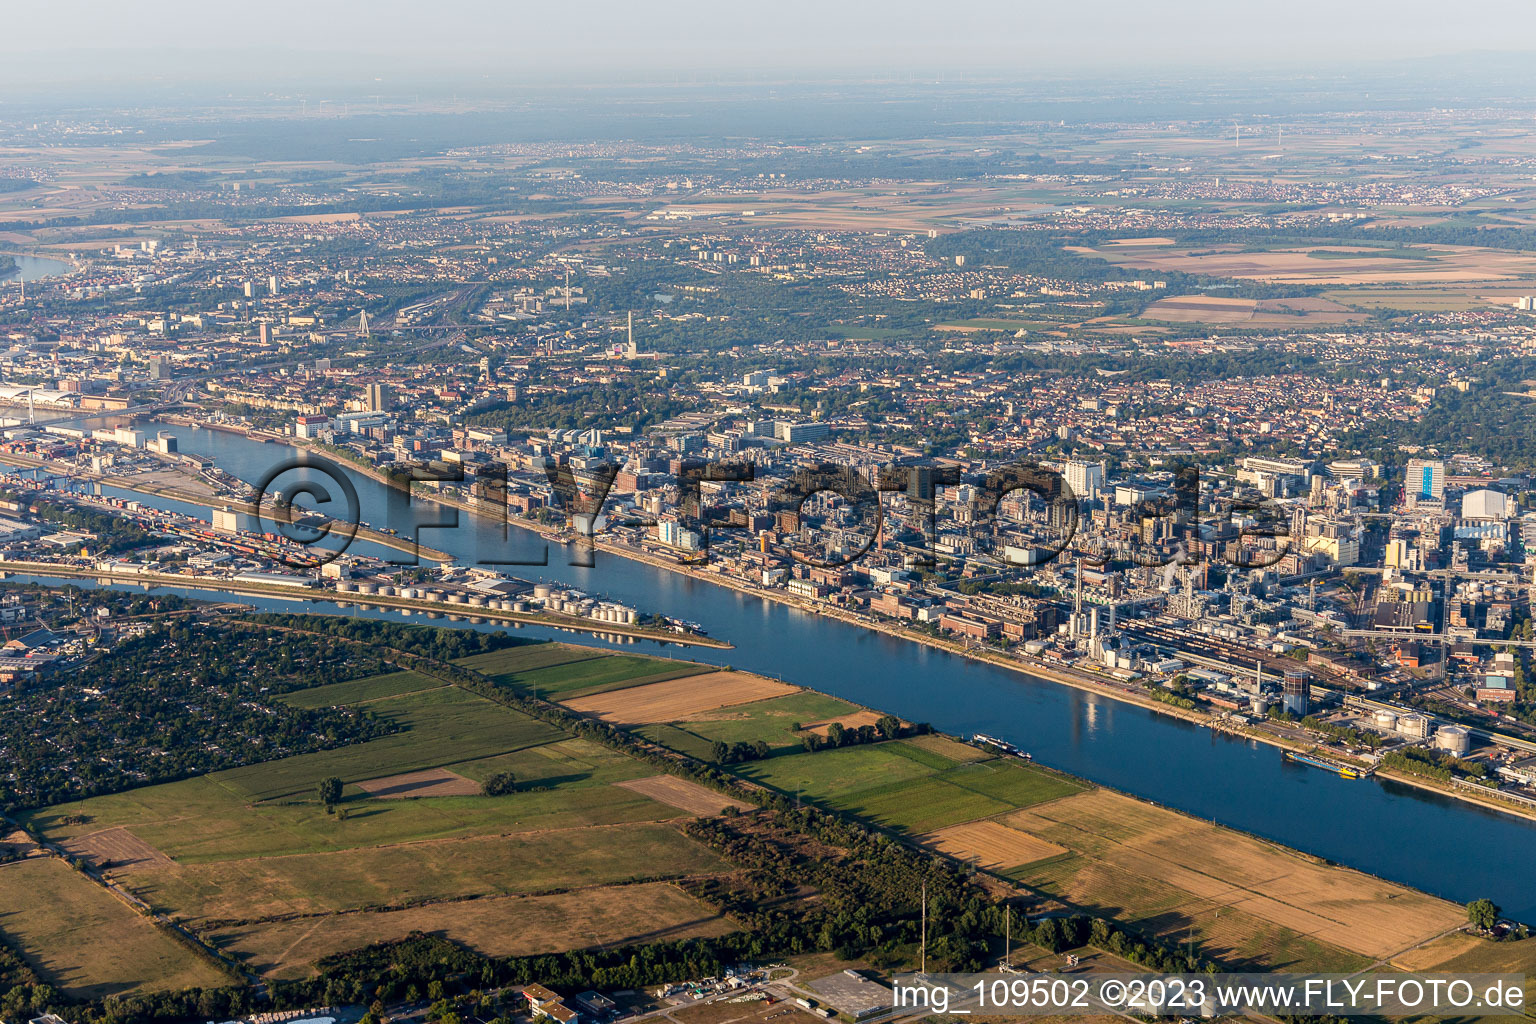 Drone image of District BASF in Ludwigshafen am Rhein in the state Rhineland-Palatinate, Germany